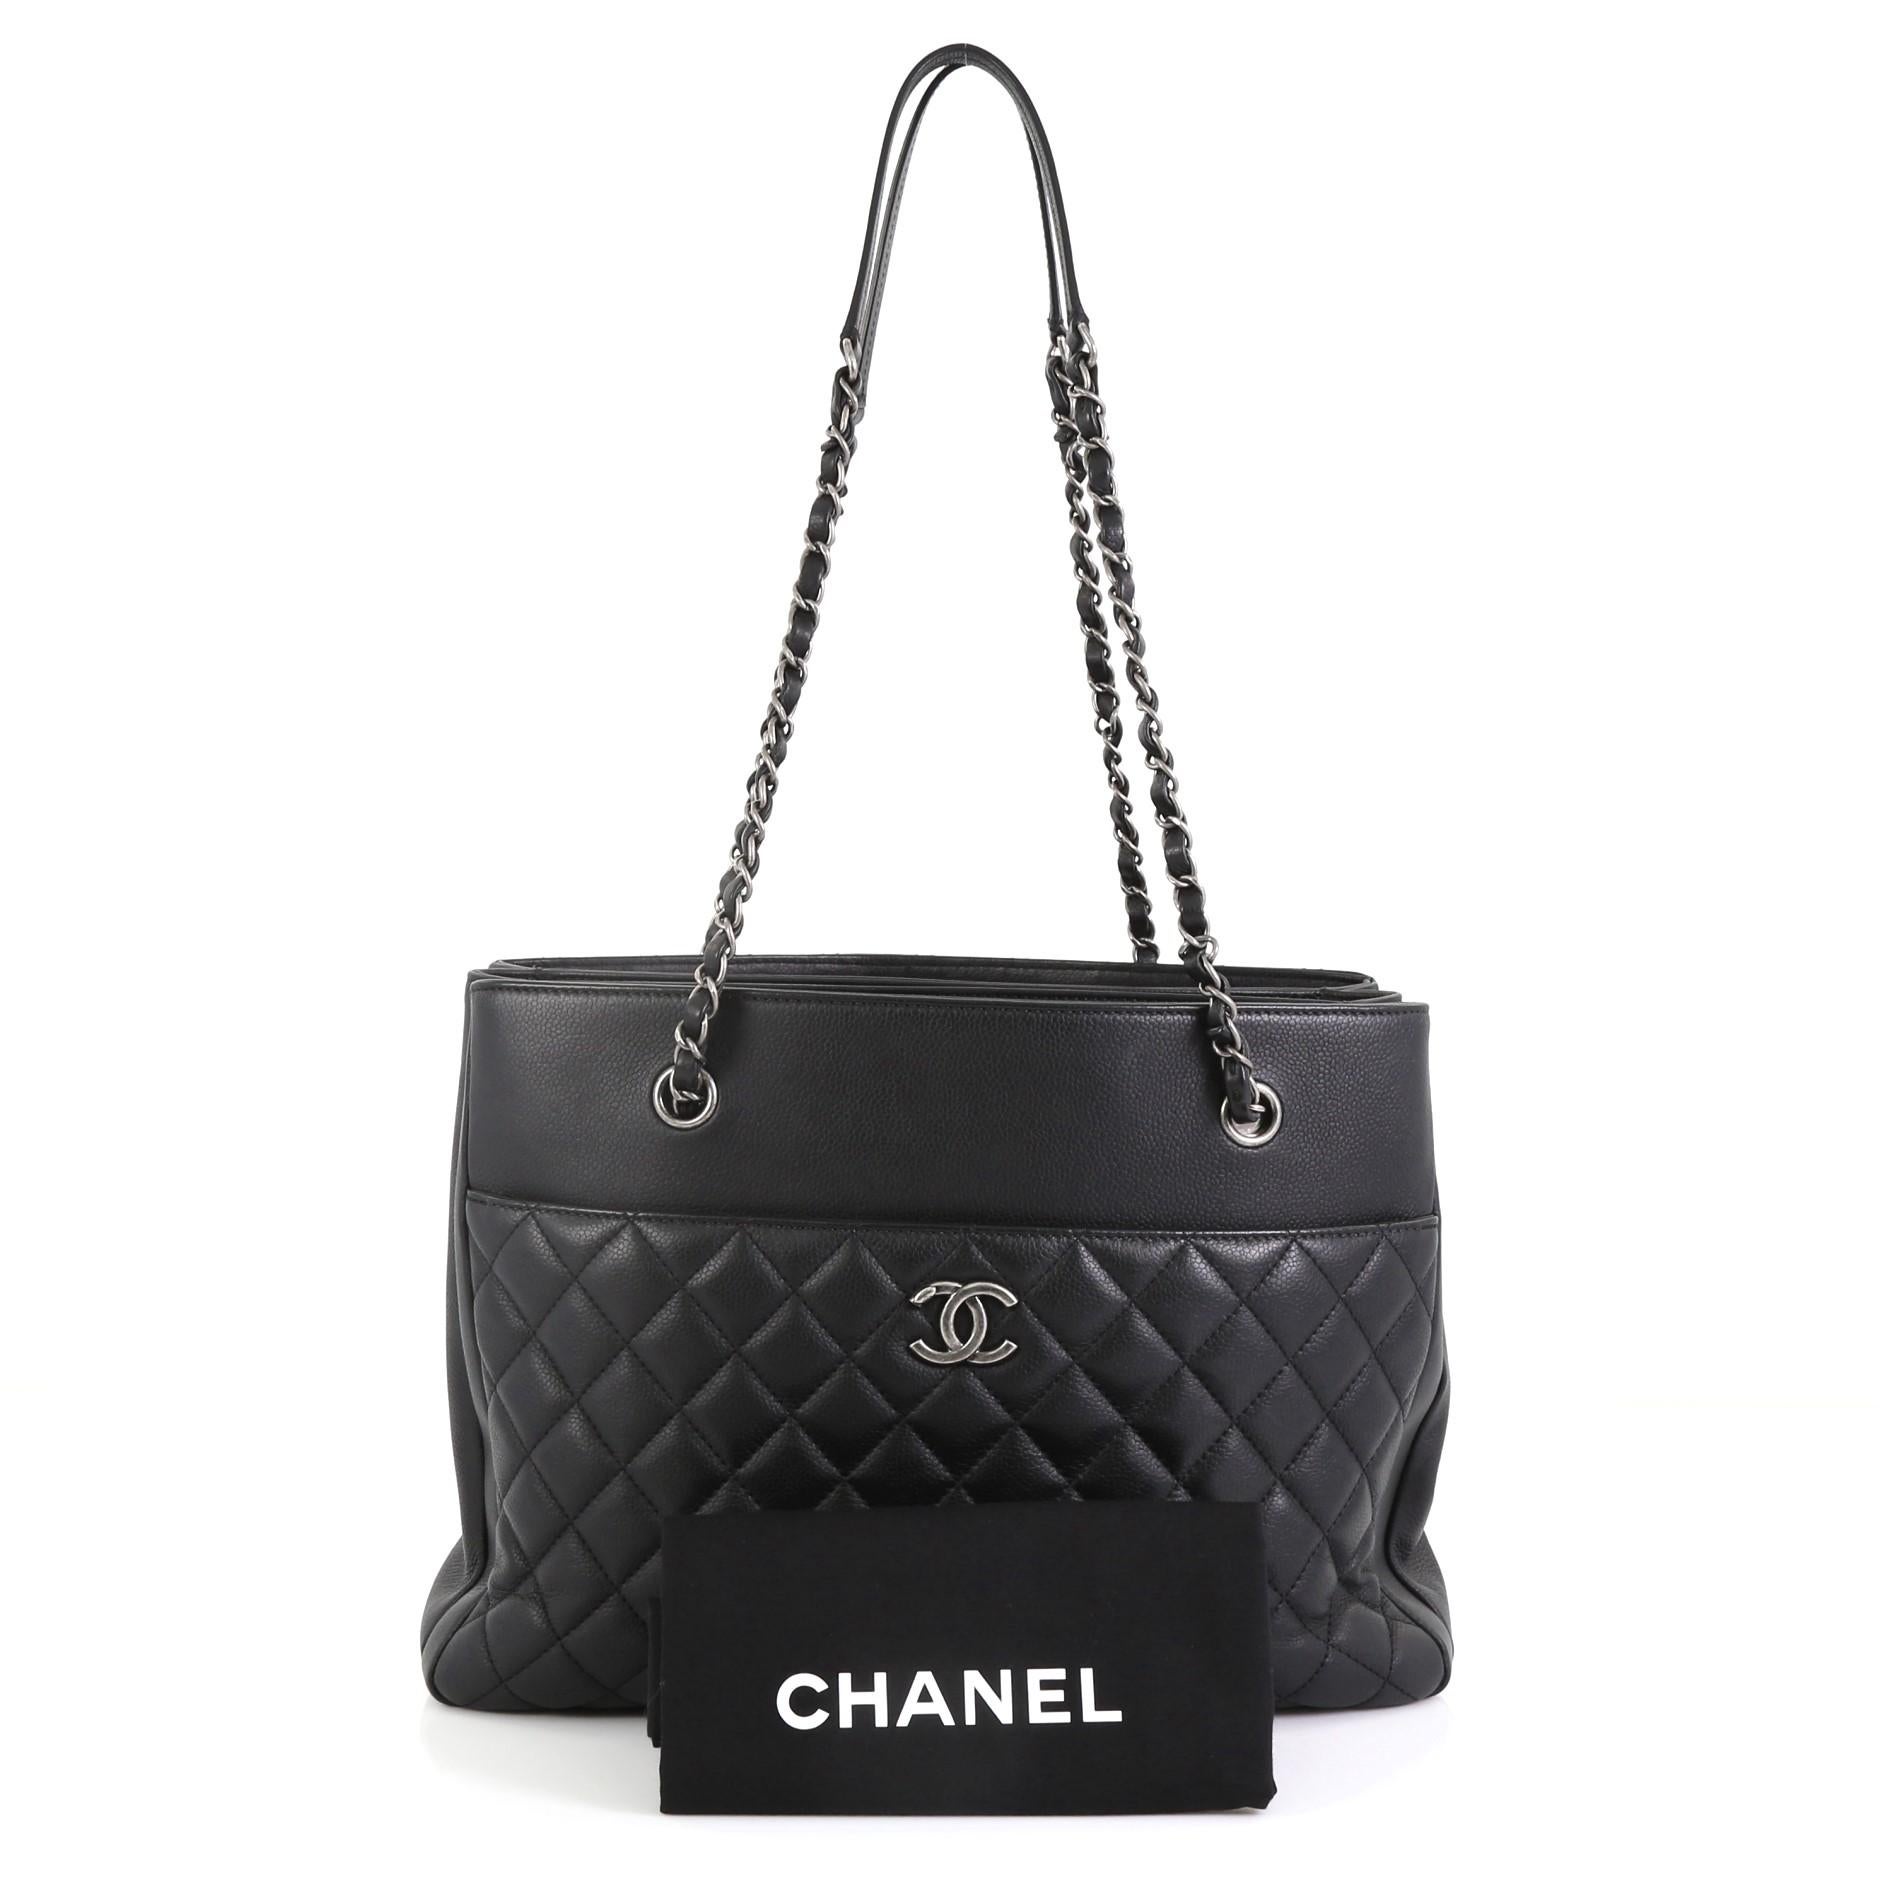 This Chanel Urban Companion Shopping Tote Quilted Caviar Medium, crafted in black leather, features dual woven-in leather chain straps with leather pad, exterior back slip pocket and aged silver-tone hardware. It opens to a black fabric interior